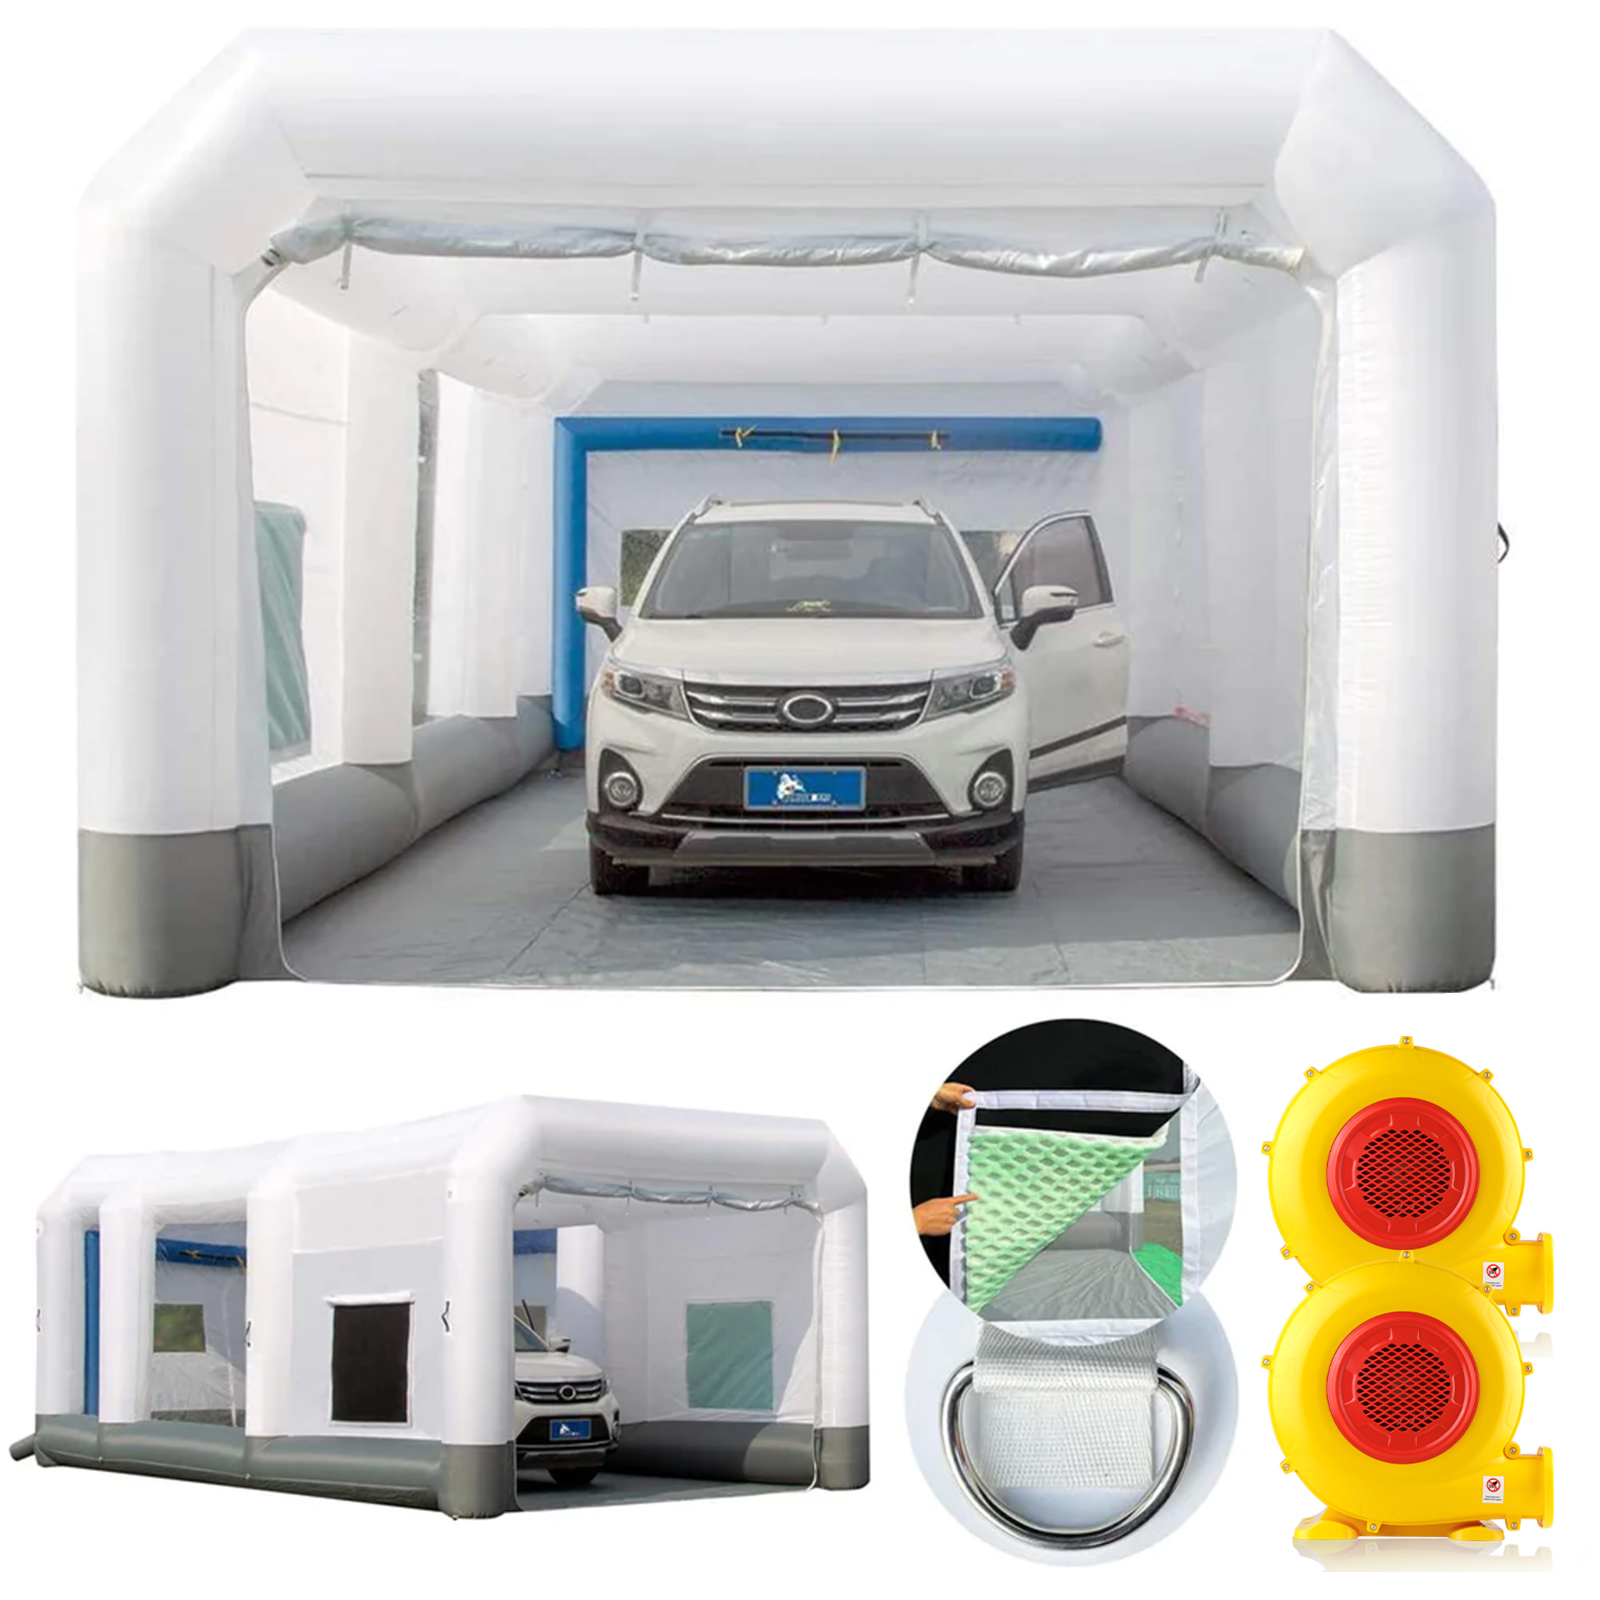 TKLoop Portable Inflatable Paint Booth 20x10x9Ft with 1 Blower Inflatable Spray Booth with Air Filter System, Blow Up Spray Booth Tent - No Tool Room